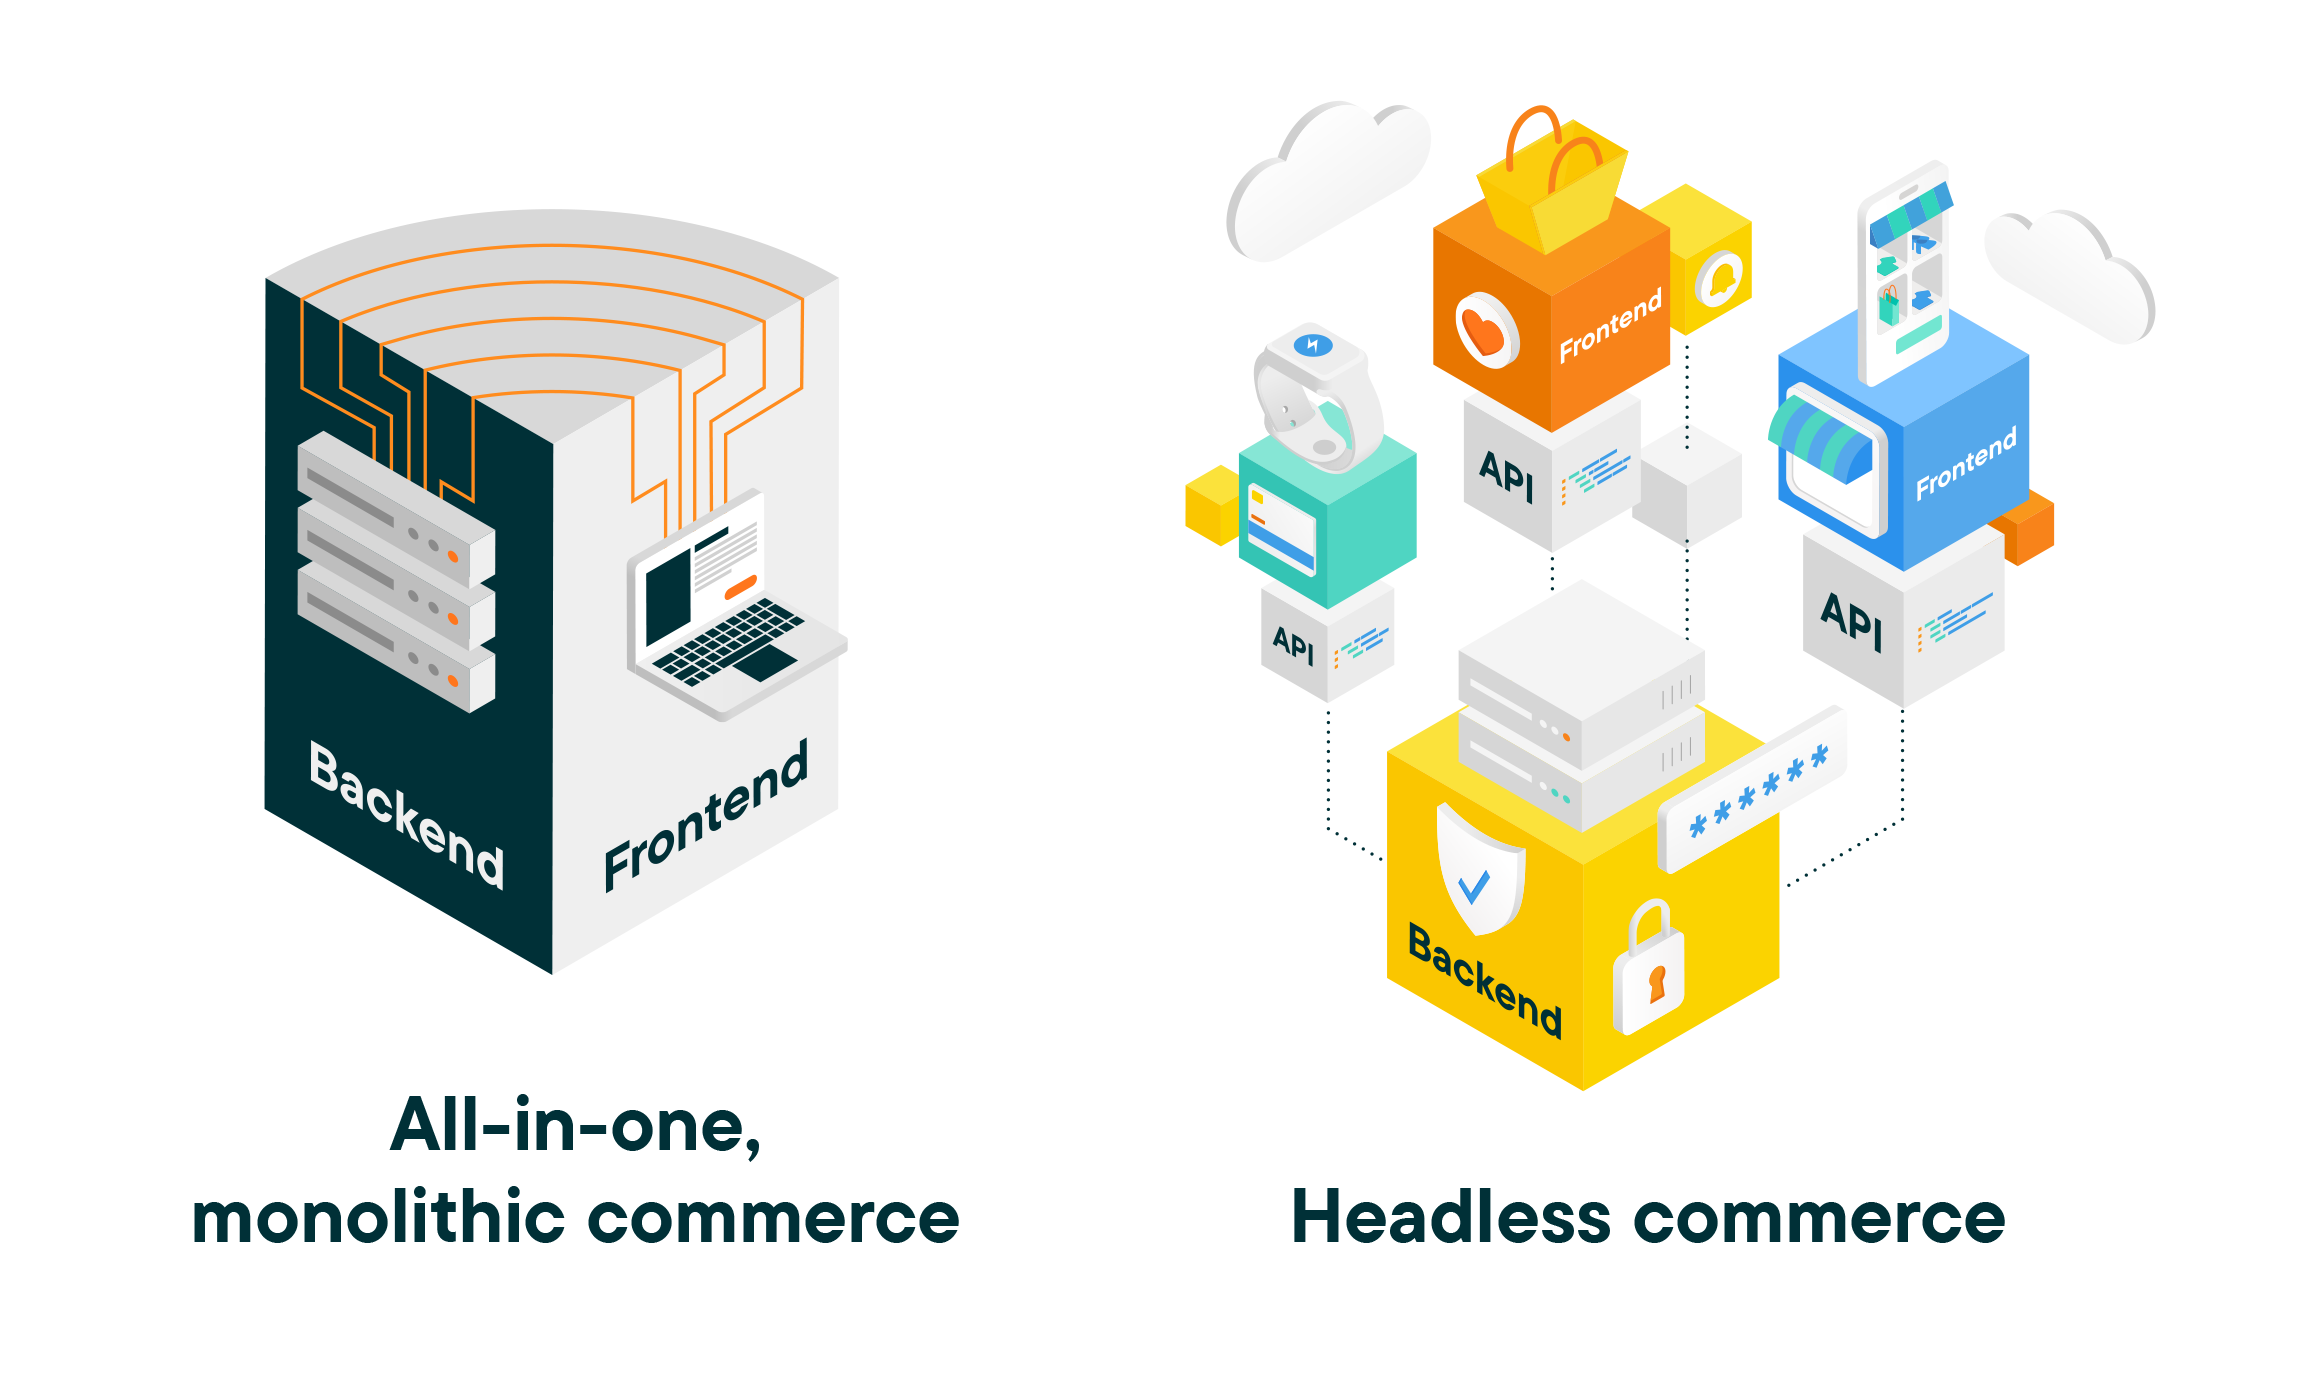 How all-in-platforms and headless commerce compare